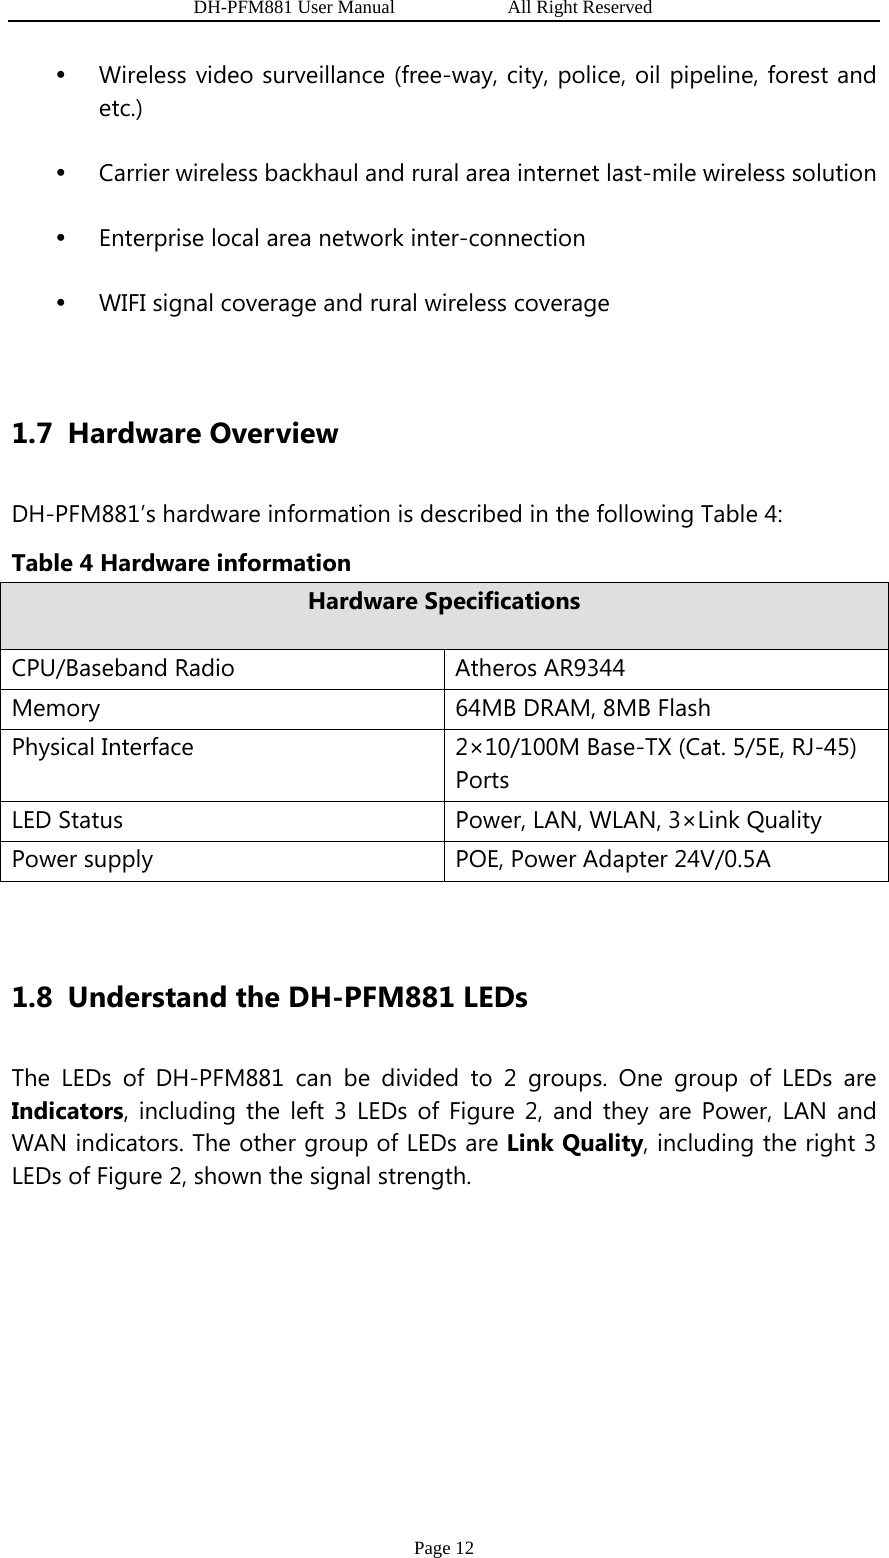                   DH-PFM881 User Manual            All Right Reserved Page 12 y Wireless video surveillance (free-way, city, police, oil pipeline, forest and etc.) y Carrier wireless backhaul and rural area internet last-mile wireless solution y Enterprise local area network inter-connection y WIFI signal coverage and rural wireless coverage  1.7 Hardware Overview DH-PFM881’s hardware information is described in the following Table 4:   Table 4 Hardware information Hardware Specifications CPU/Baseband Radio  Atheros AR9344 Memory  64MB DRAM, 8MB Flash Physical Interface  2×10/100M Base-TX (Cat. 5/5E, RJ-45) Ports LED Status  Power, LAN, WLAN, 3×Link Quality Power supply  POE, Power Adapter 24V/0.5A  1.8 Understand the DH-PFM881 LEDs The LEDs of DH-PFM881 can be divided to 2 groups. One group of LEDs are Indicators, including the left 3 LEDs of Figure 2, and they are Power, LAN and WAN indicators. The other group of LEDs are Link Quality, including the right 3 LEDs of Figure 2, shown the signal strength. 